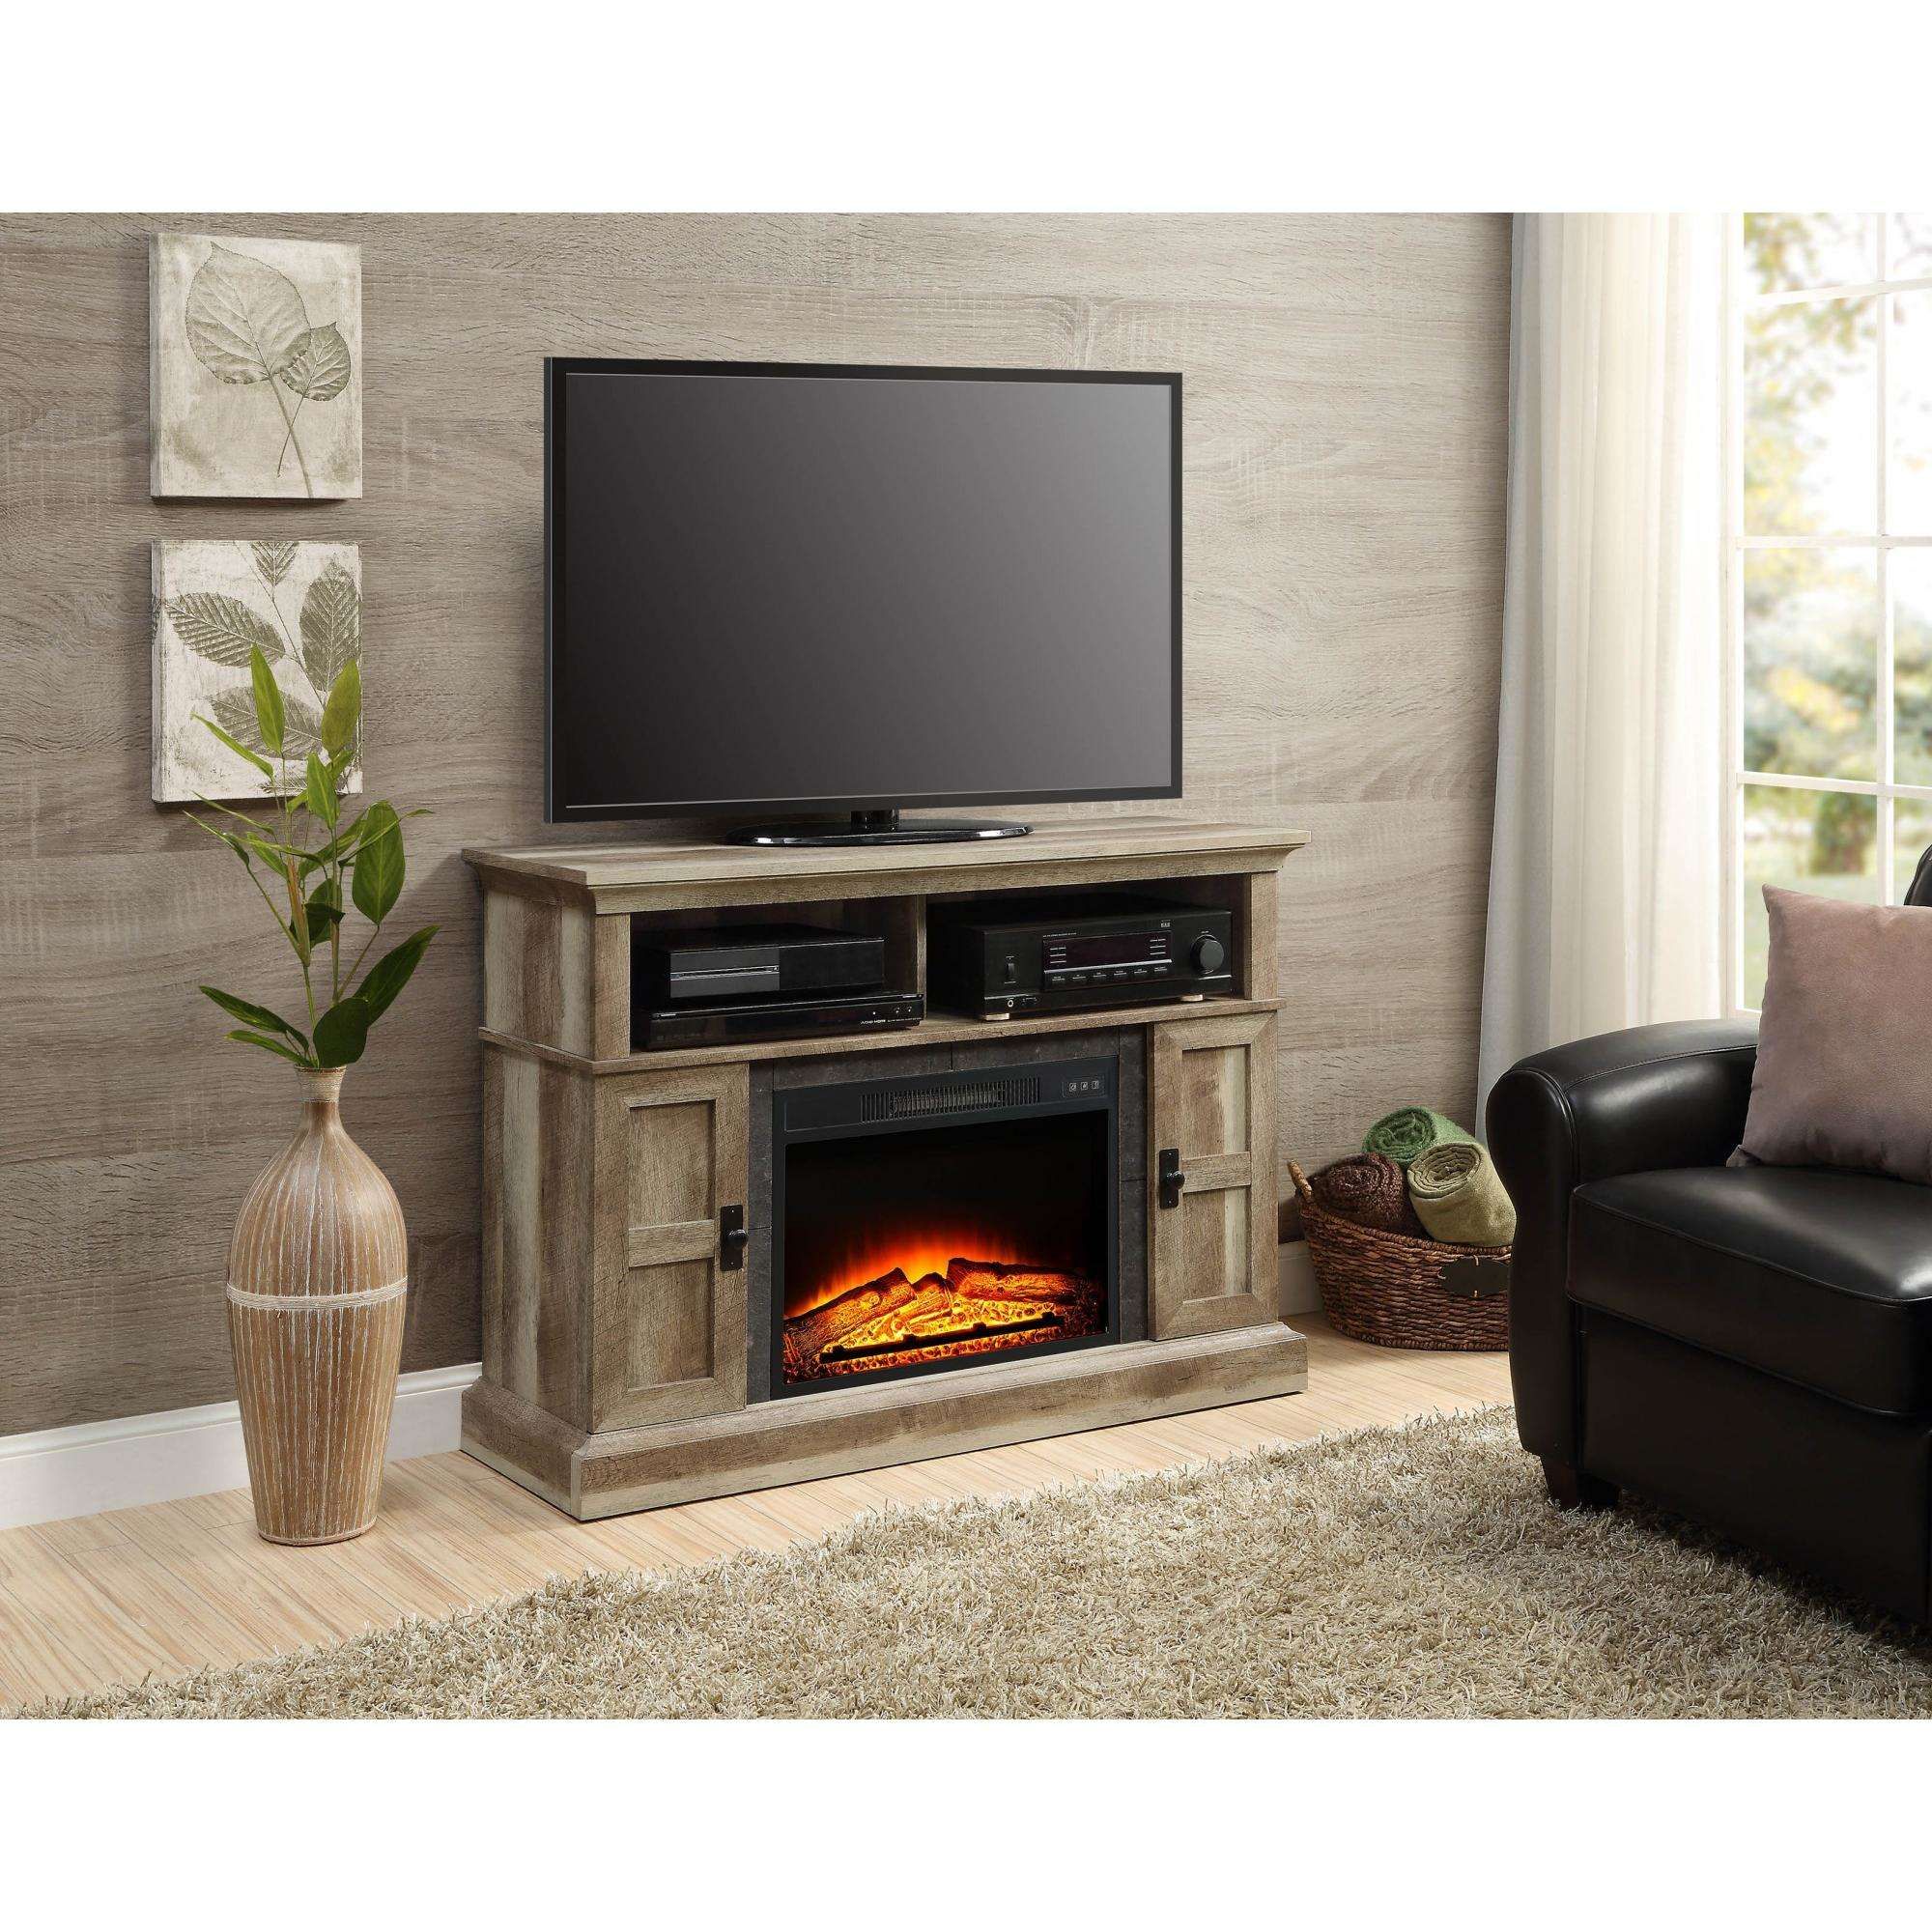 55 Inch Electric Fireplace Inspirational Whalen Media Fireplace for Your Home Television Stand Fits